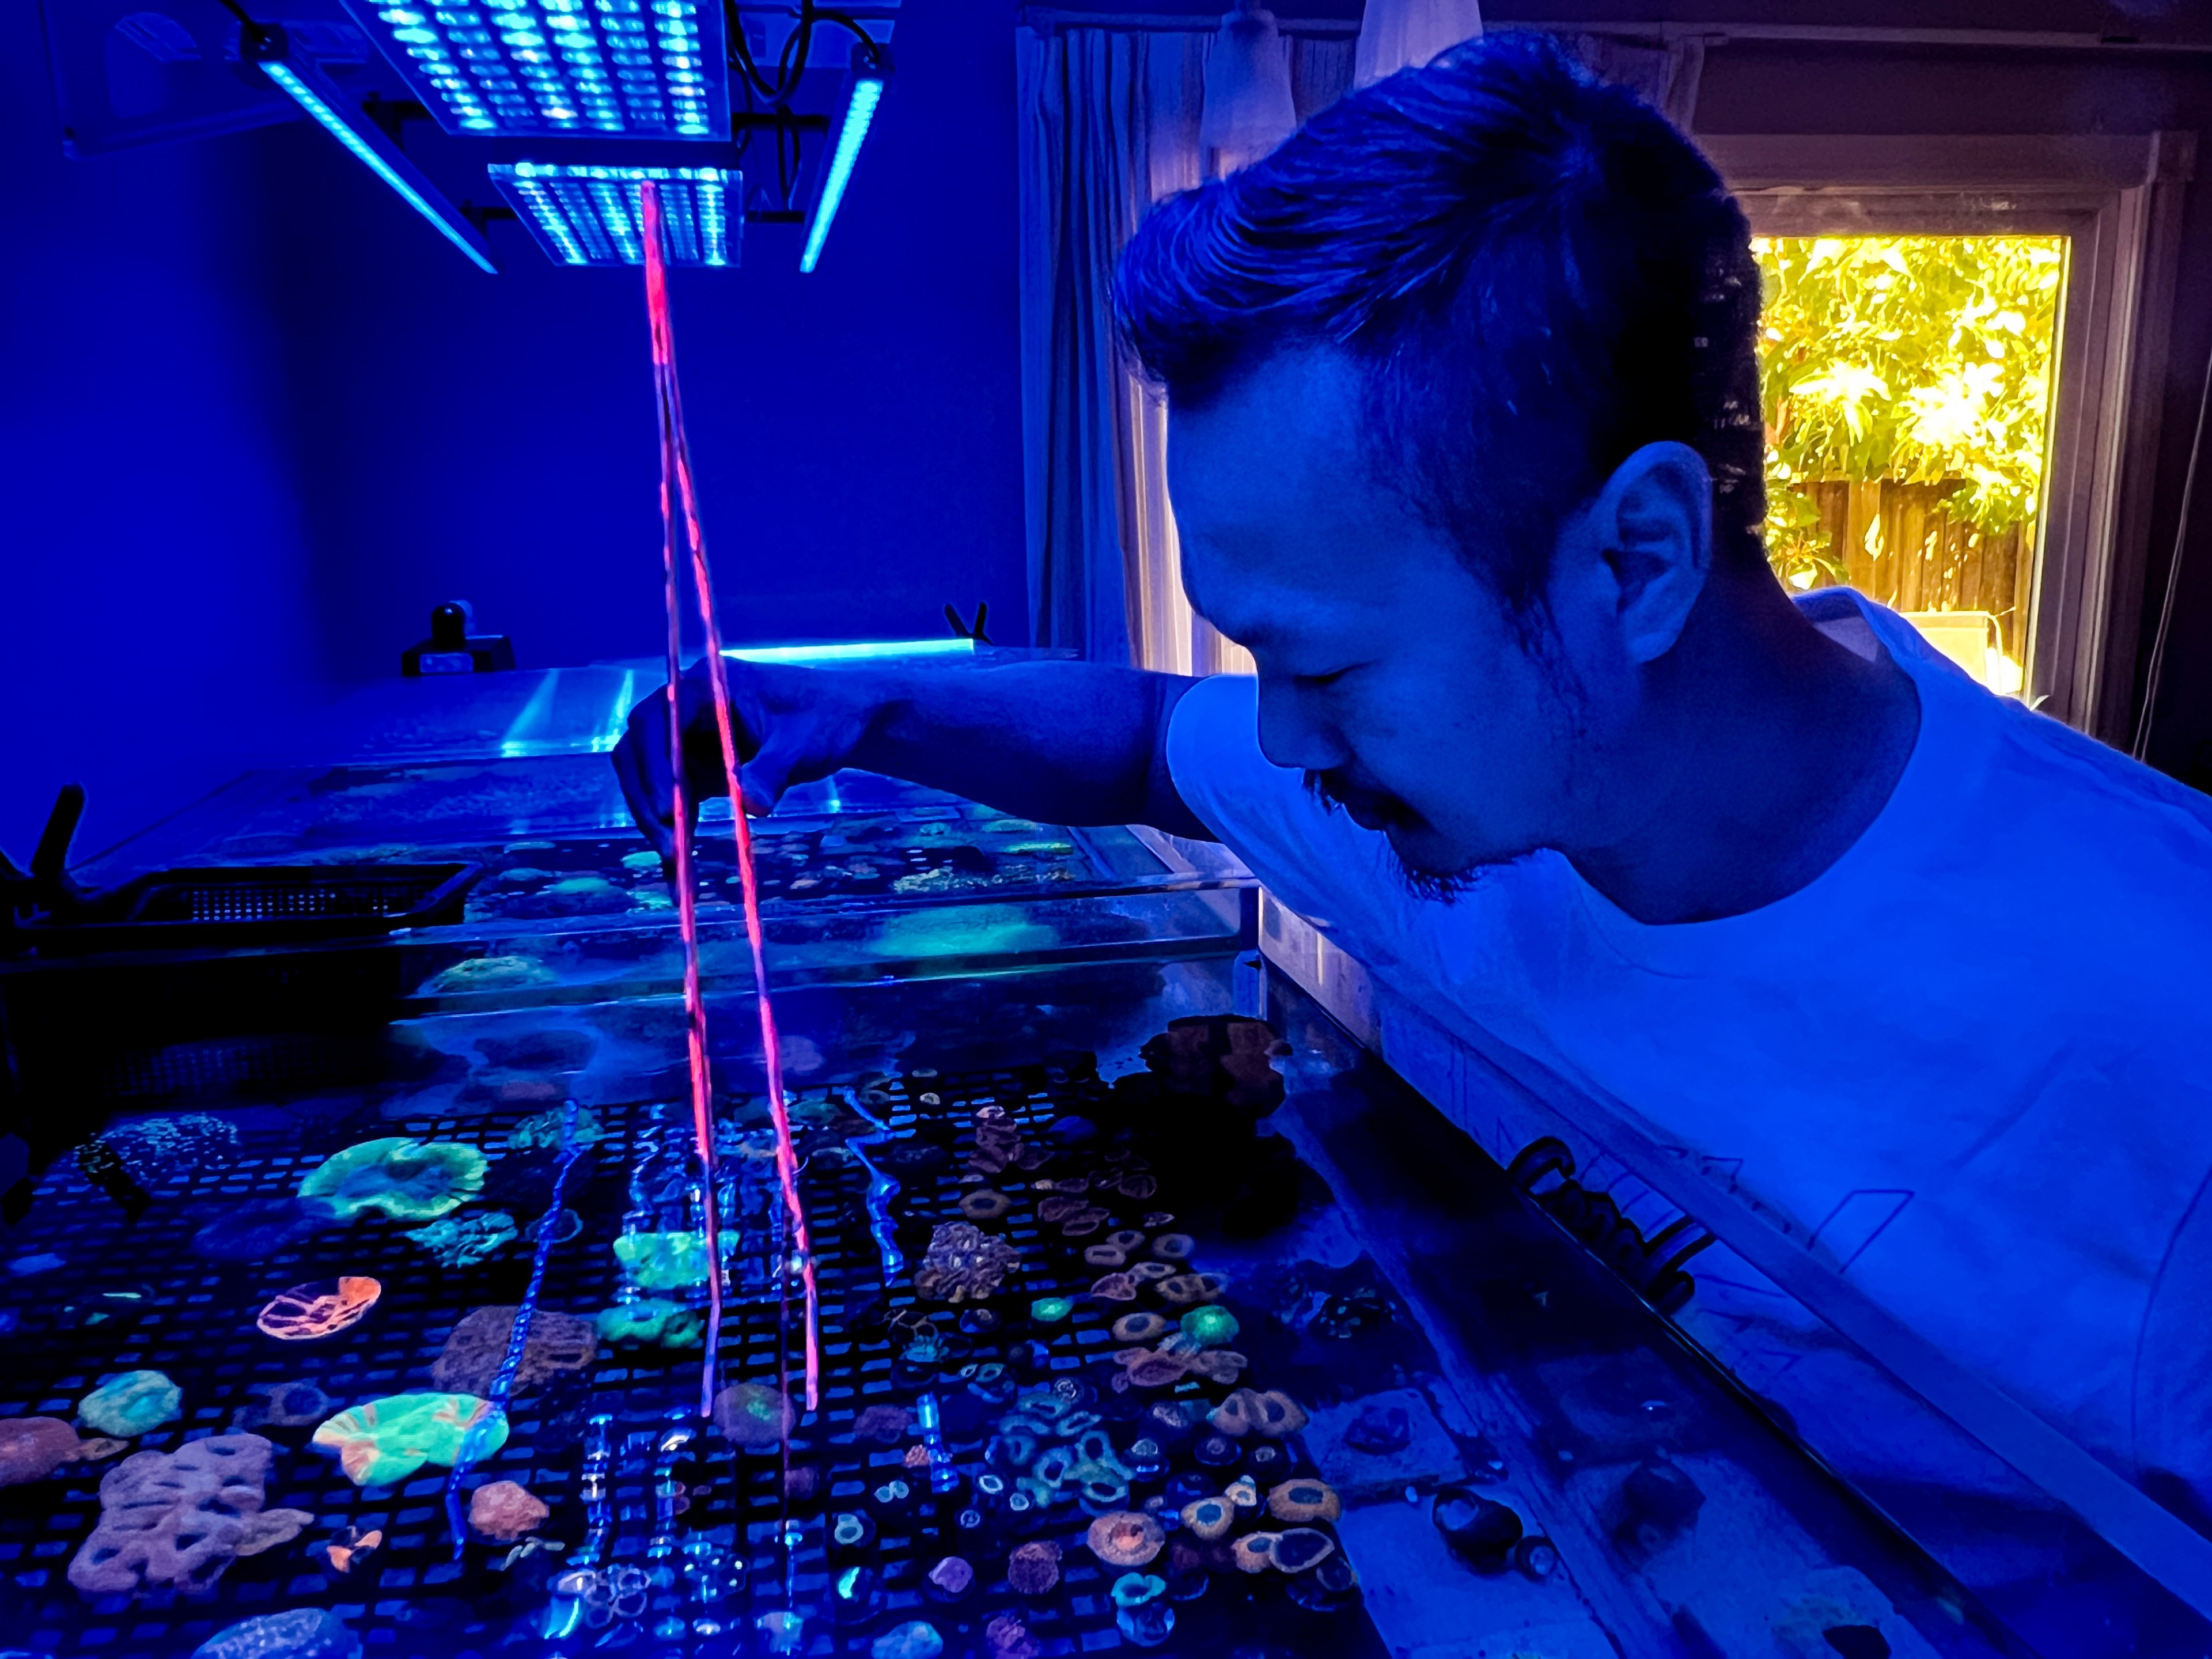 A man tends to a vibrant coral aquarium under blue light, holding a glowing red rod.